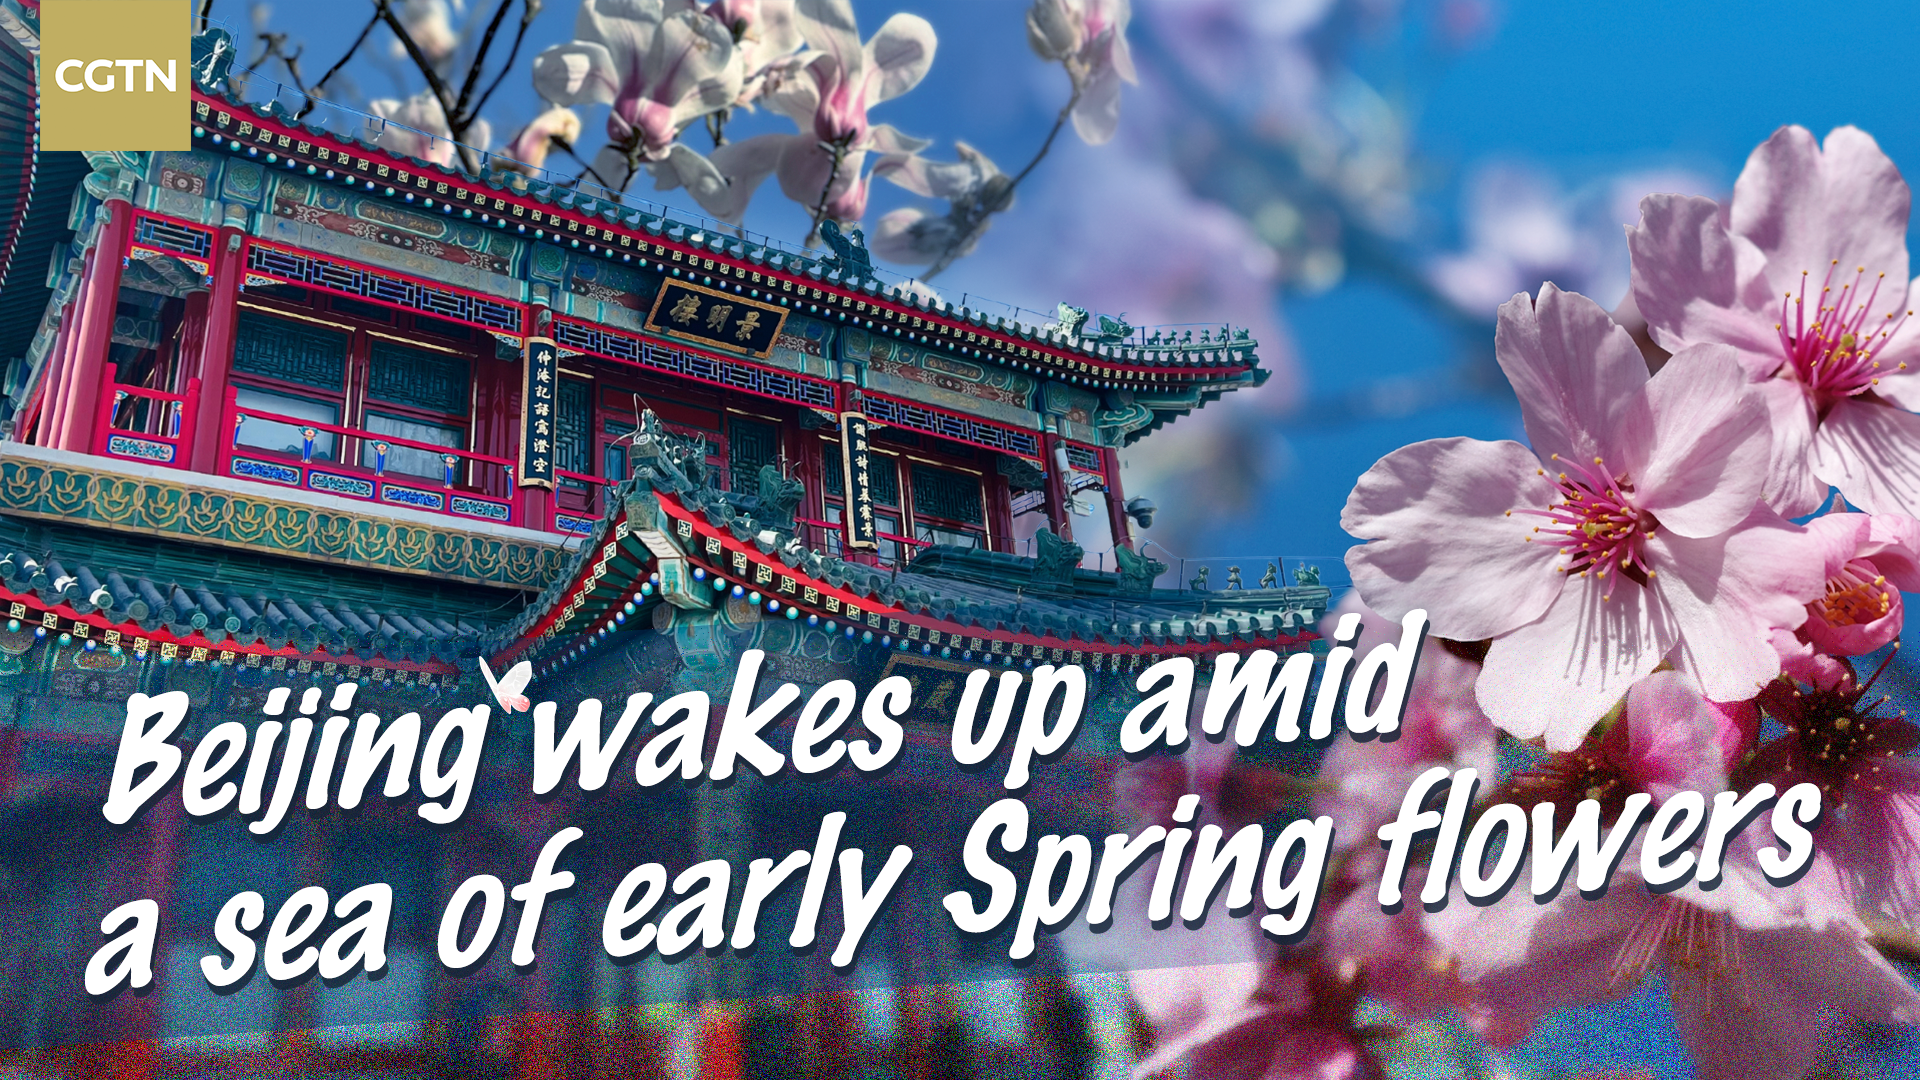 Live: Beijing wakes up amid a sea of early Spring flowers